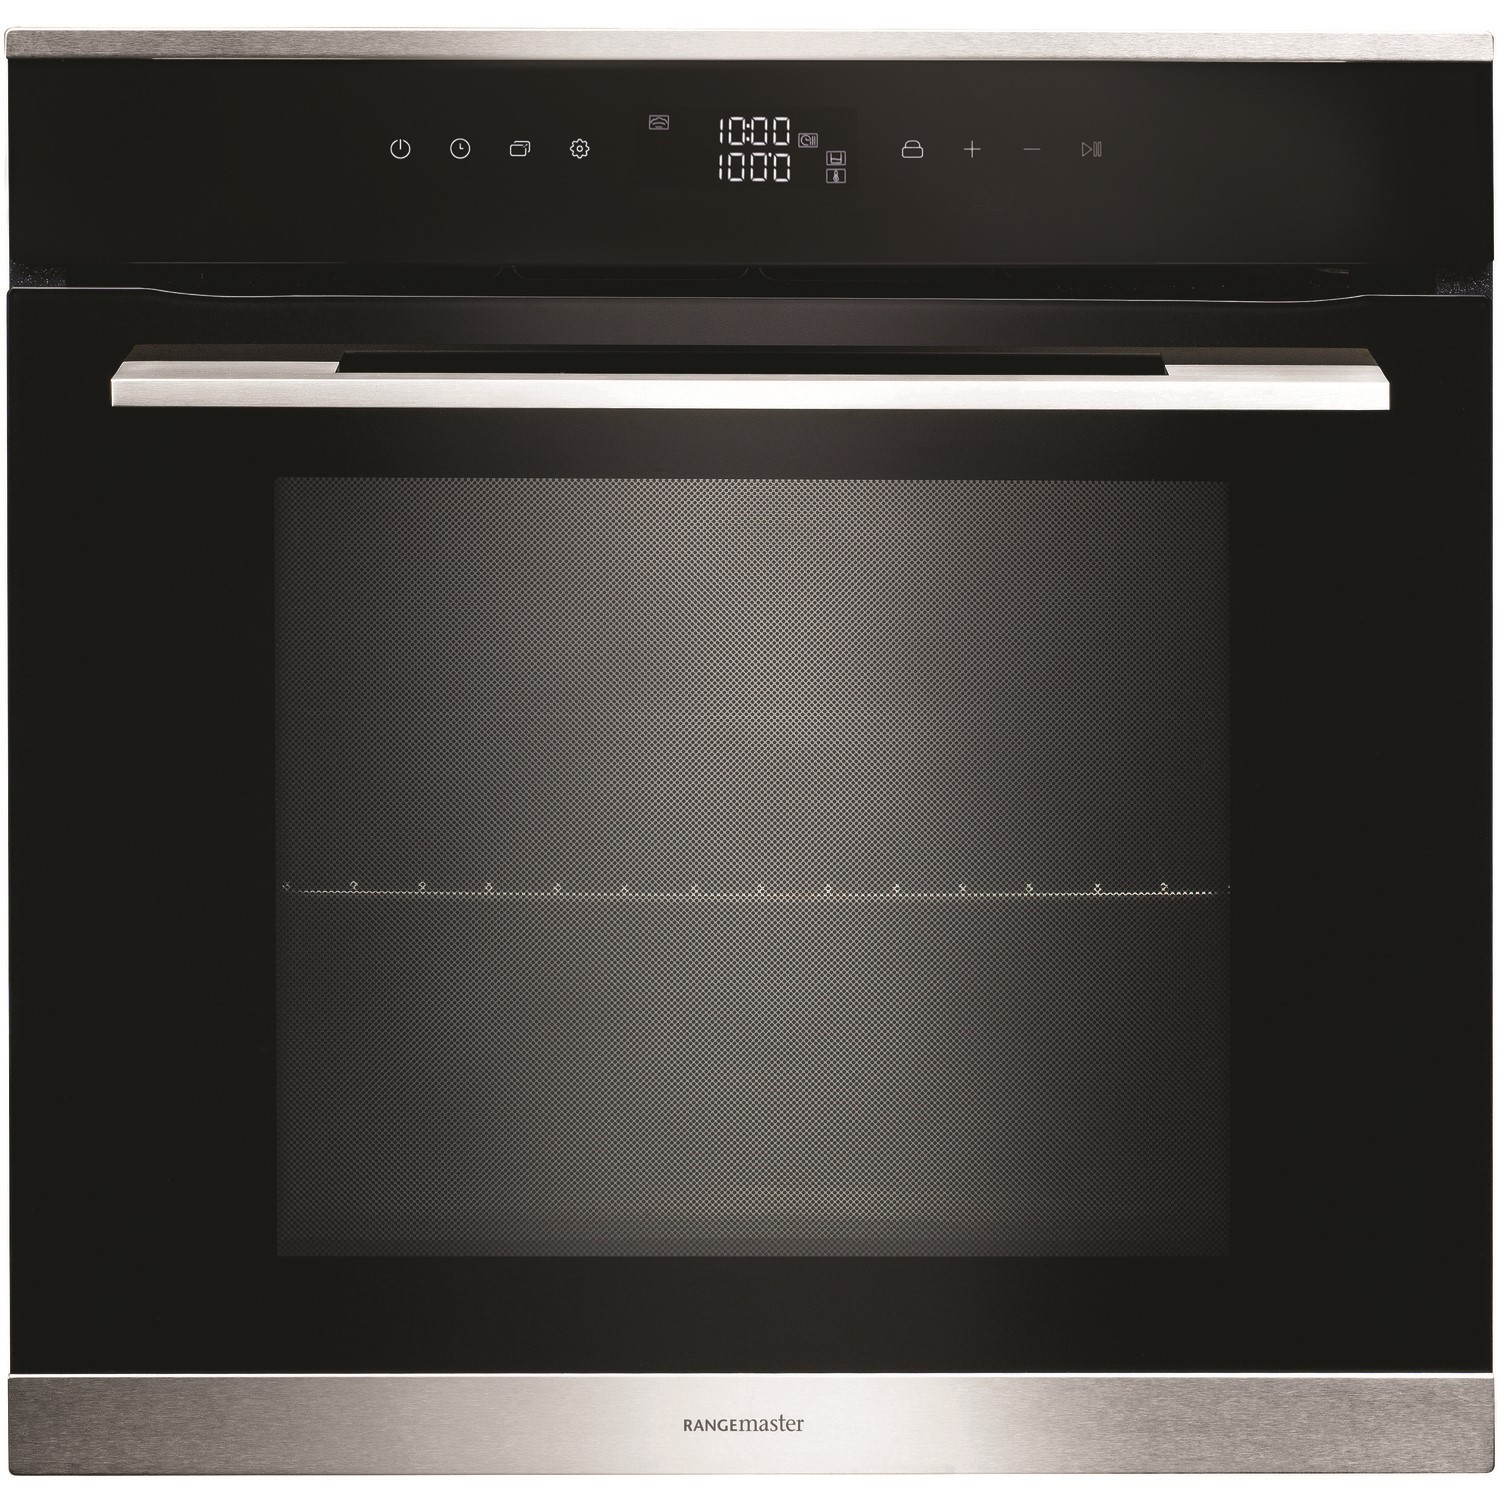 Rangemaster RMB610BLSS 60cm Electric Built-in 10 Function Single Oven - Black And Stainless Steel